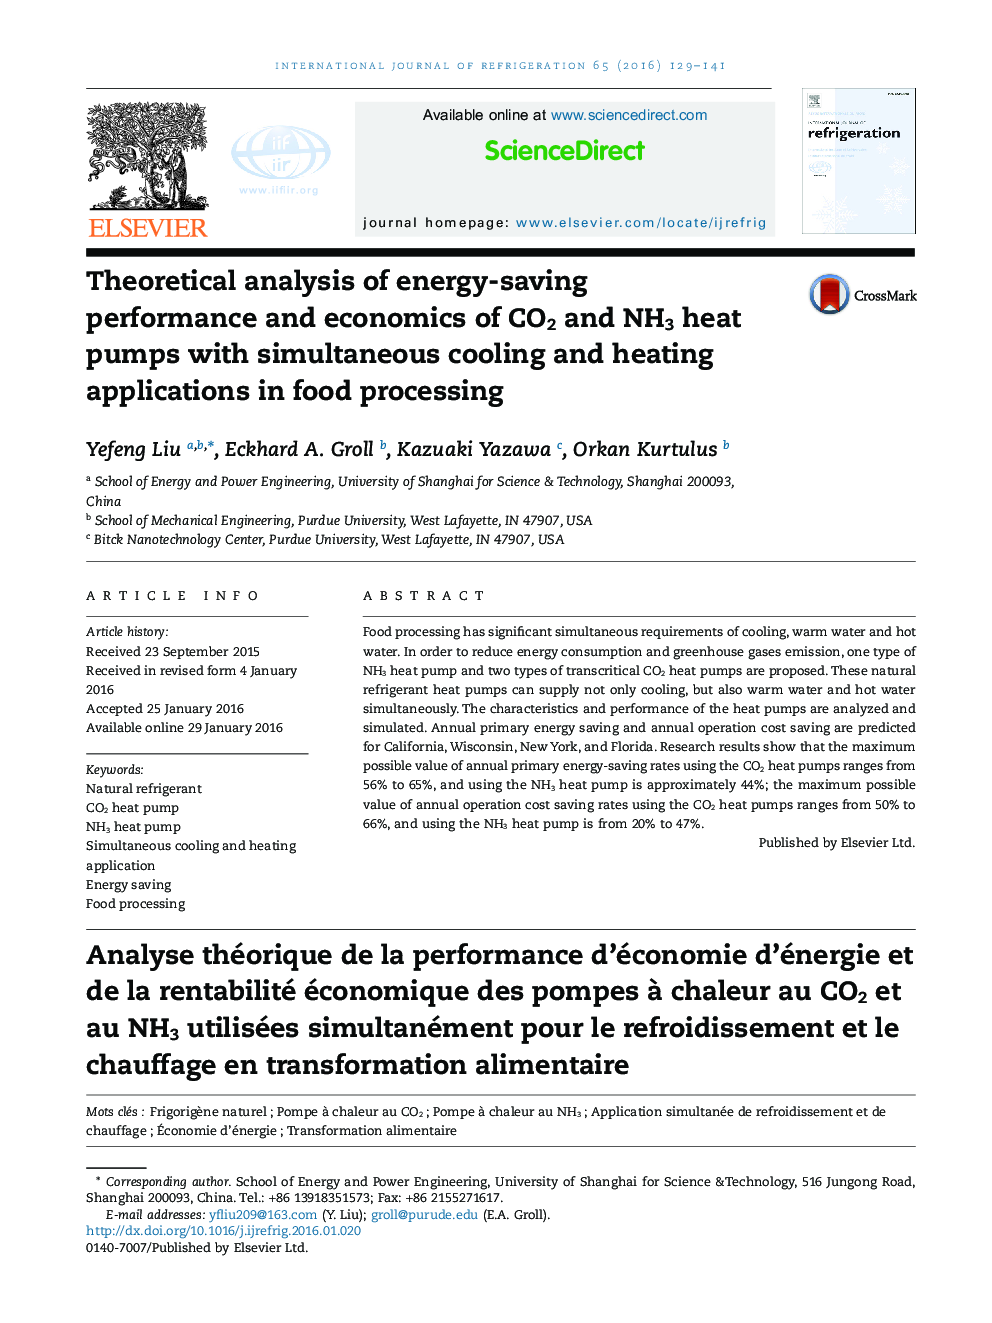 Theoretical analysis of energy-saving performance and economics of CO2 and NH3 heat pumps with simultaneous cooling and heating applications in food processing